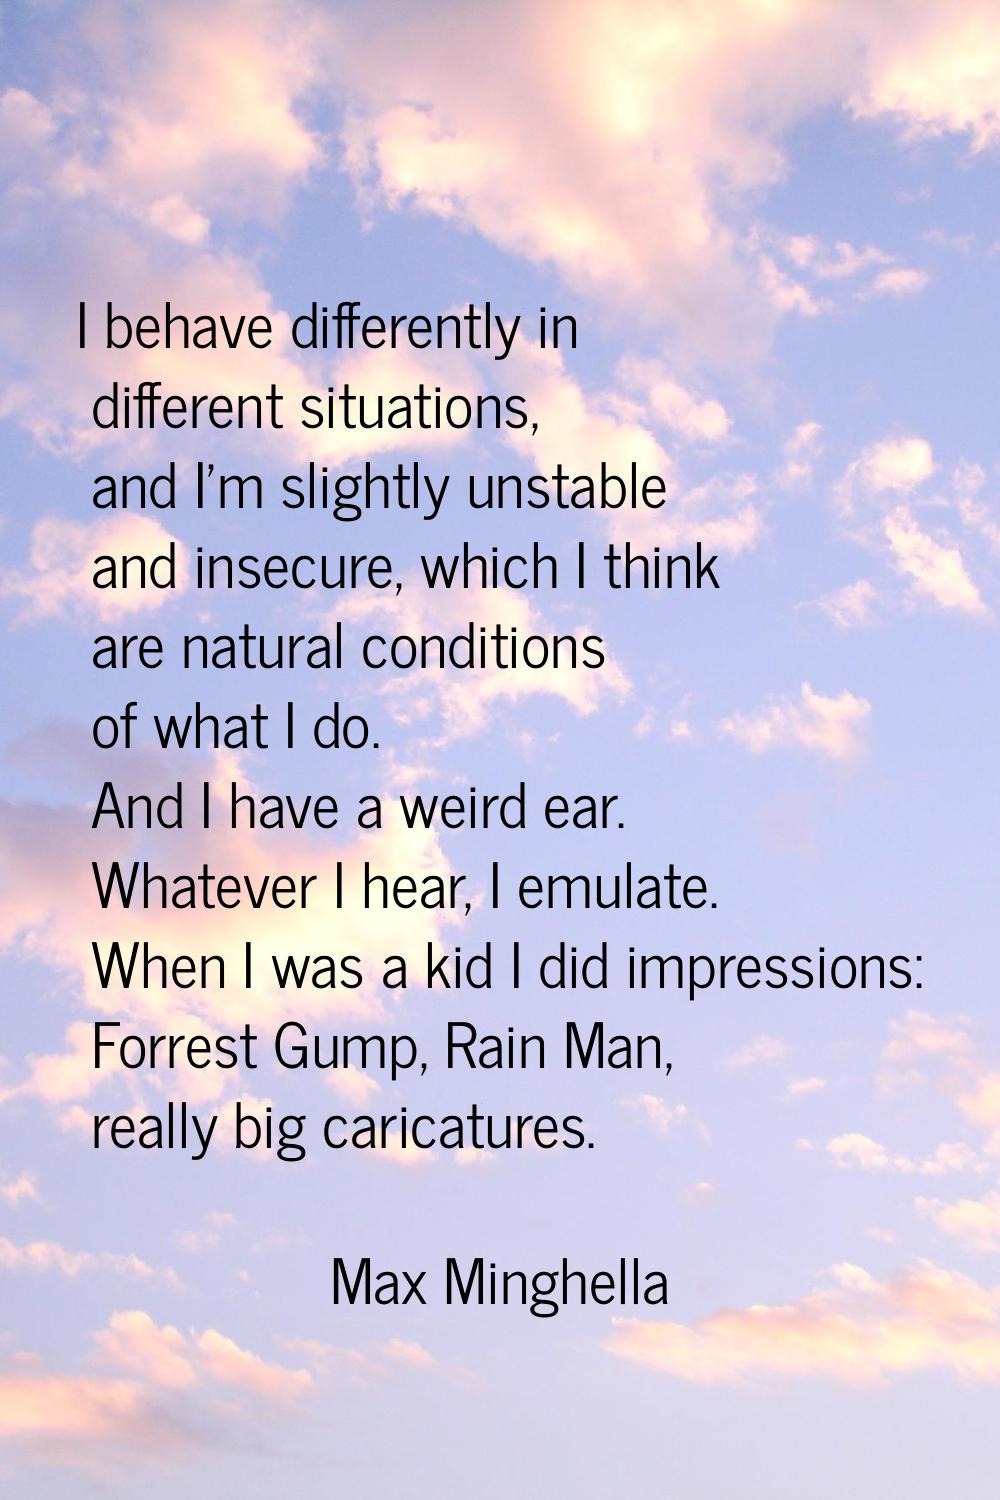 I behave differently in different situations, and I'm slightly unstable and insecure, which I think